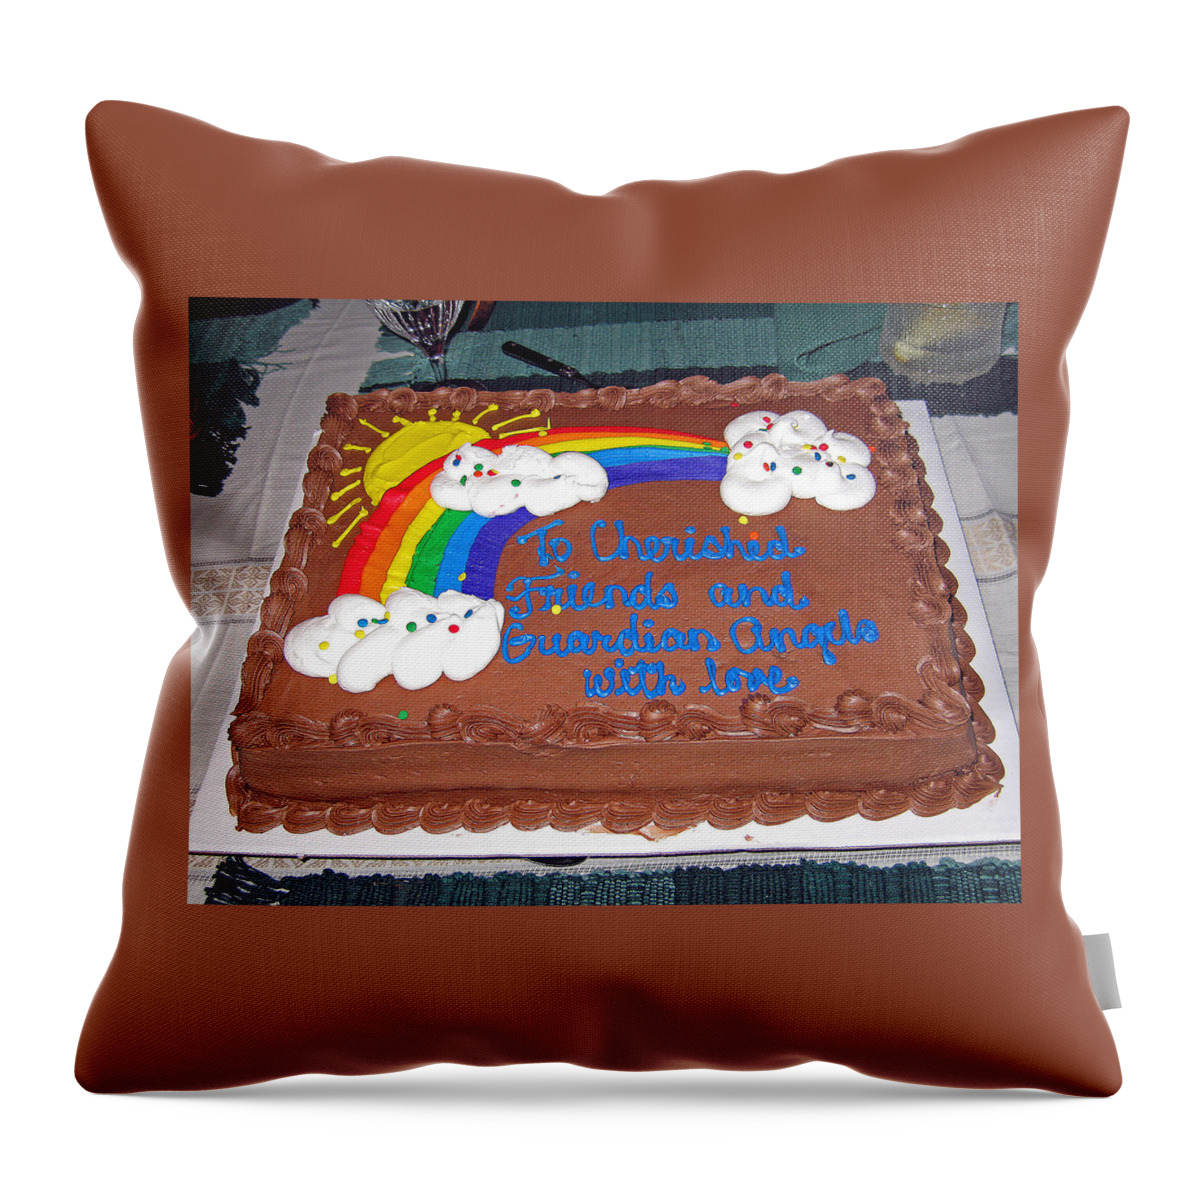 Cake Throw Pillow featuring the photograph Celebration To Cherished Friends by Jay Milo